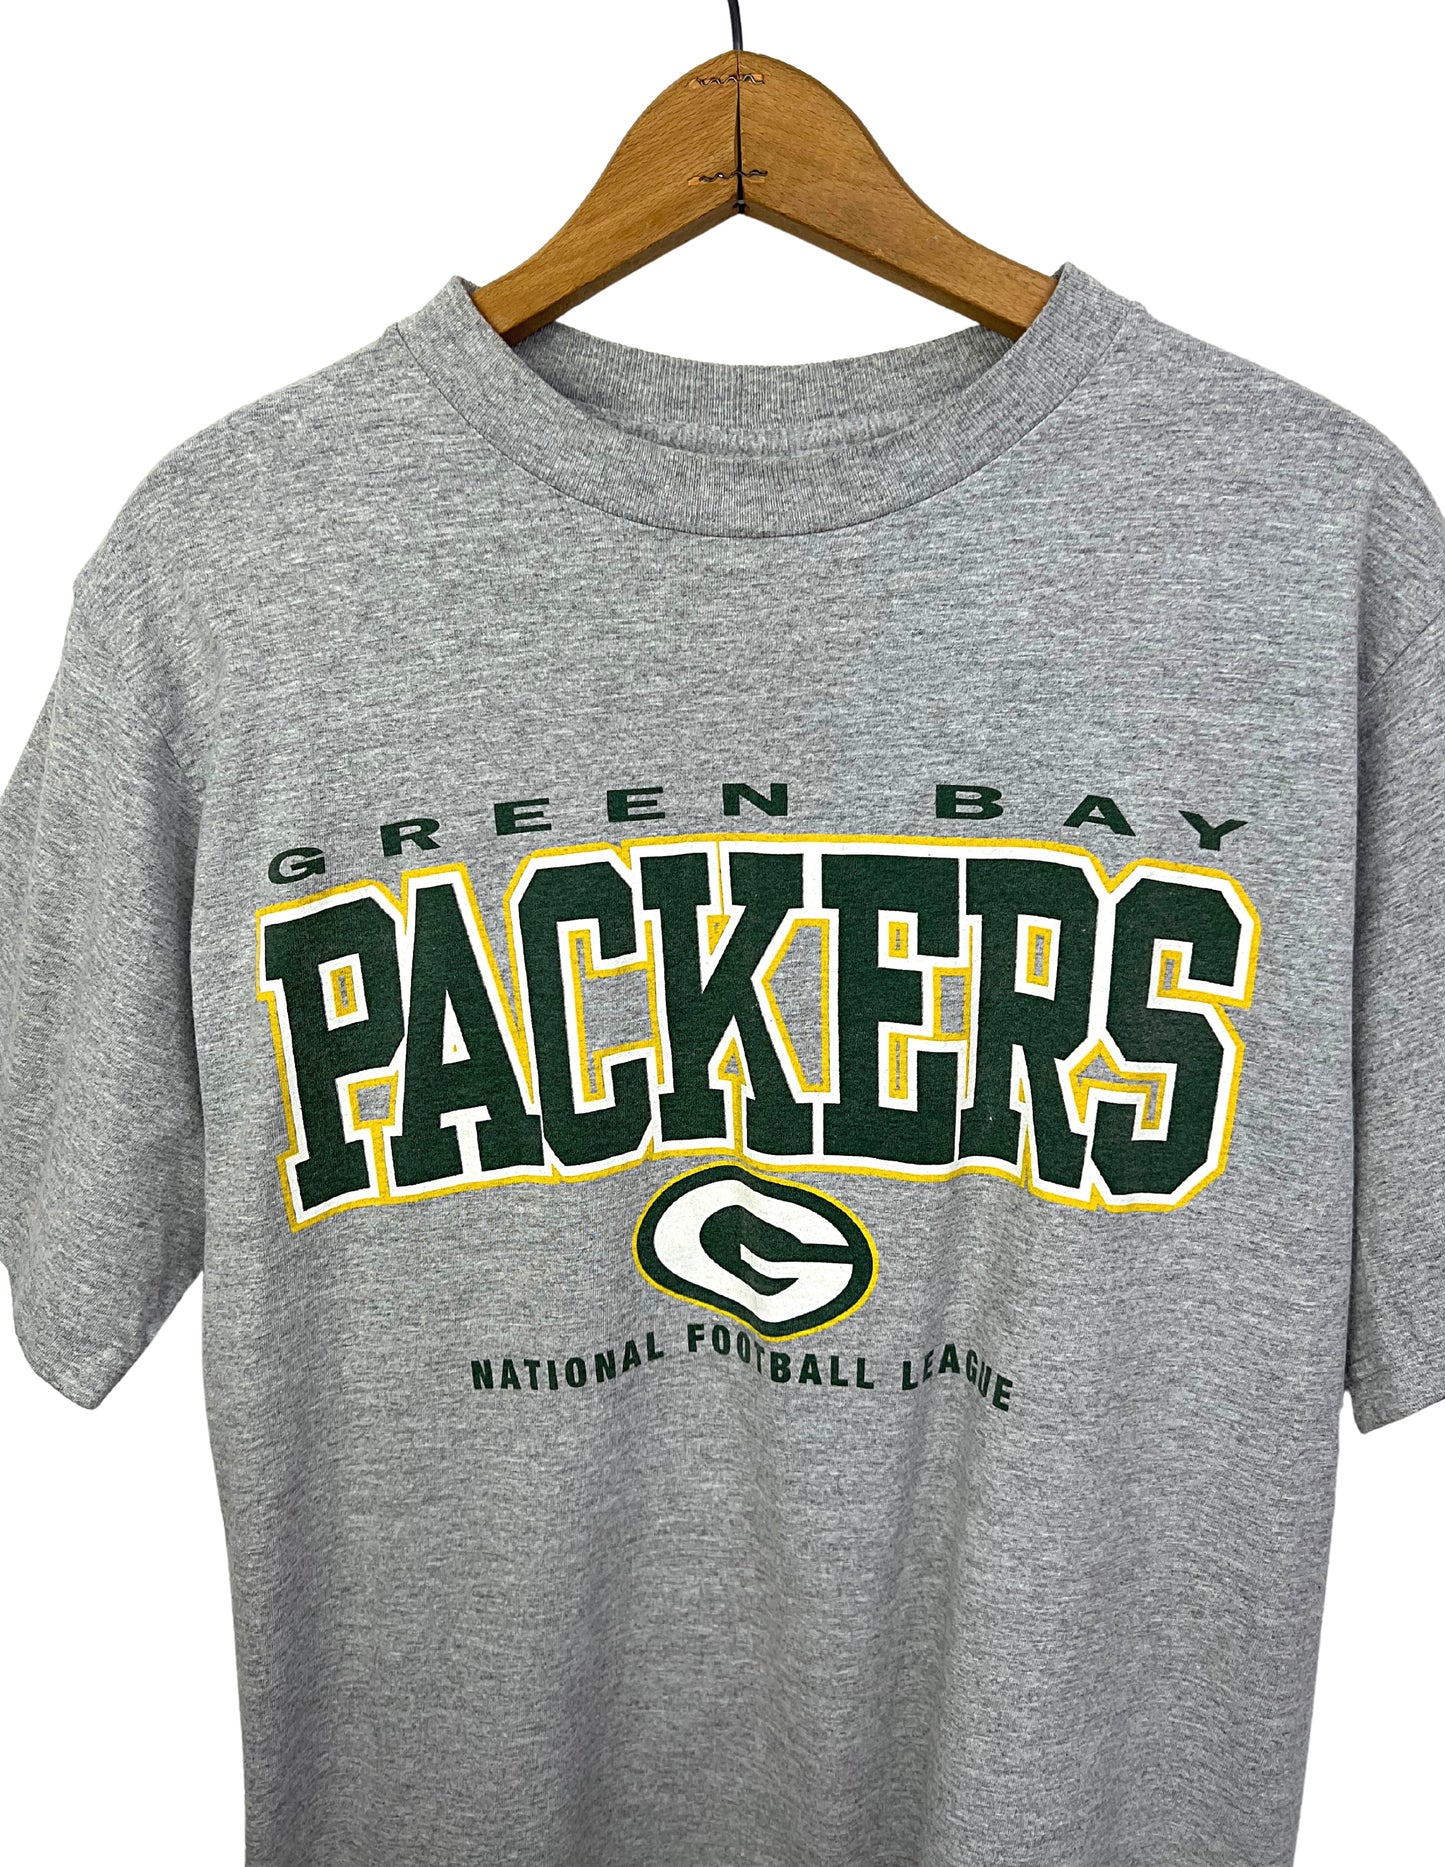 90’s Green Bay Packers Football T-shirt Size S/M